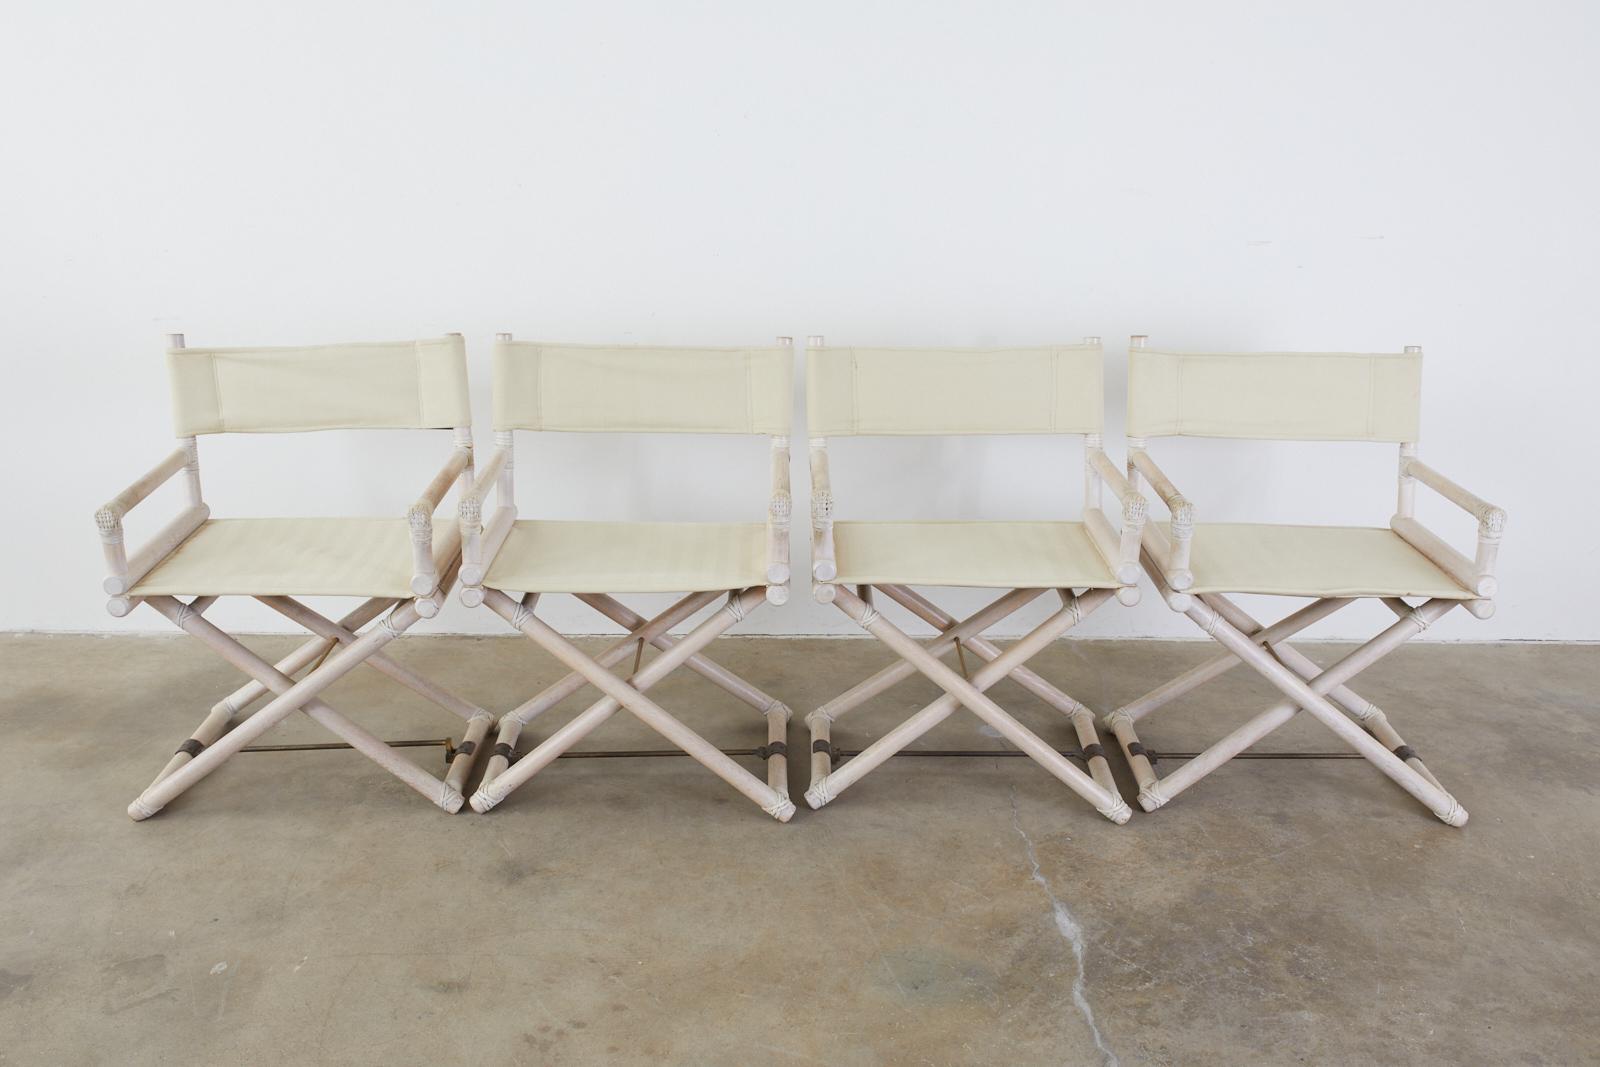 Rare set of four midcentury Campaign-style directors chairs by Leonard Linden for McGuire. The chairs feature a whitewashed or Cerused finish on the oak. Embellished with leather rawhide laces on the exposed joints and patinated brass stretchers on